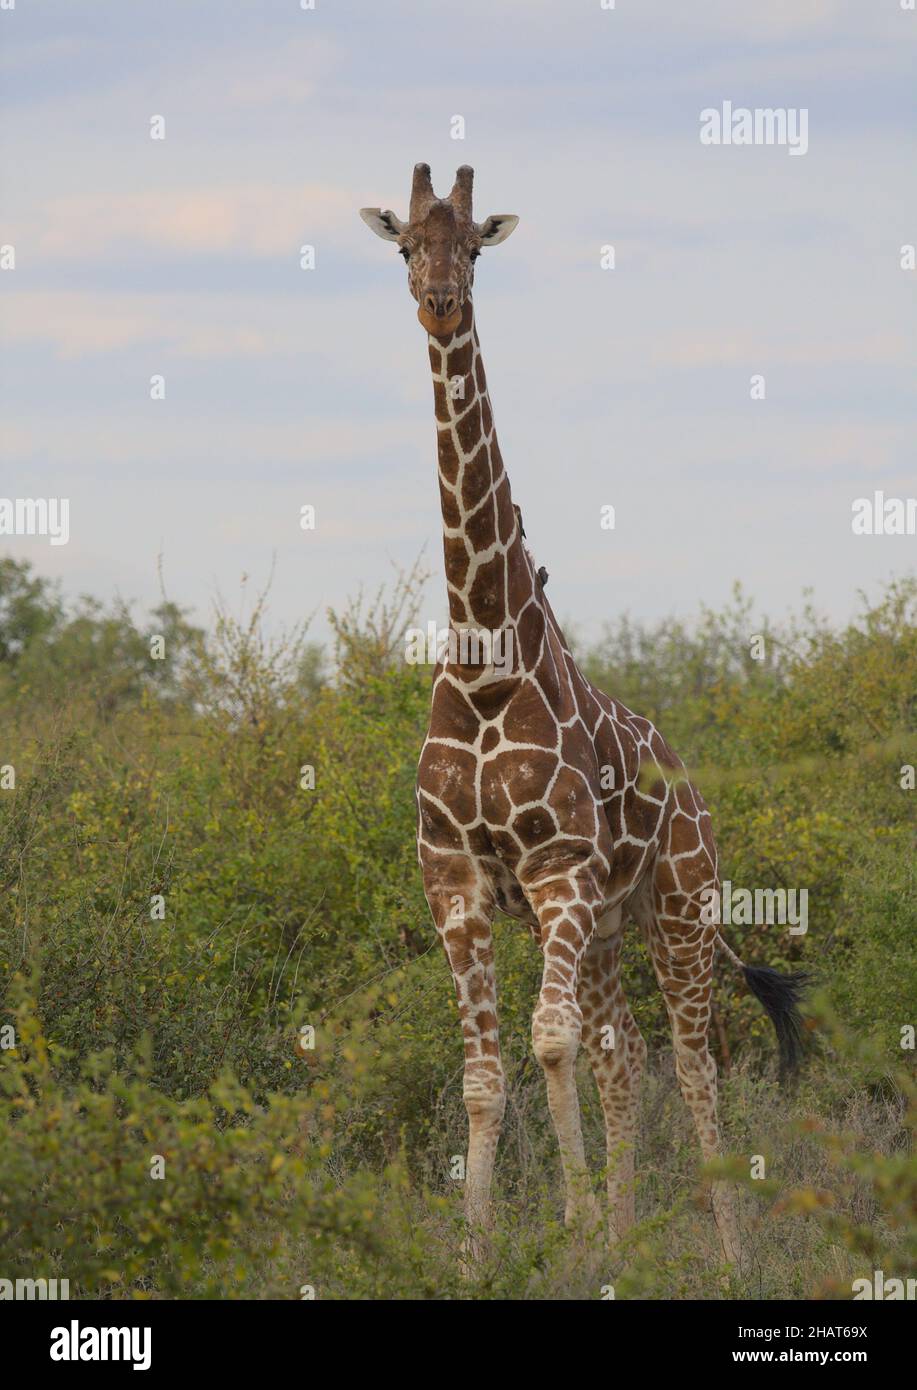 full length portrait of reticulated giraffe standing alert and curiously with sky in background in the wild Meru National Park, Kenya Stock Photo